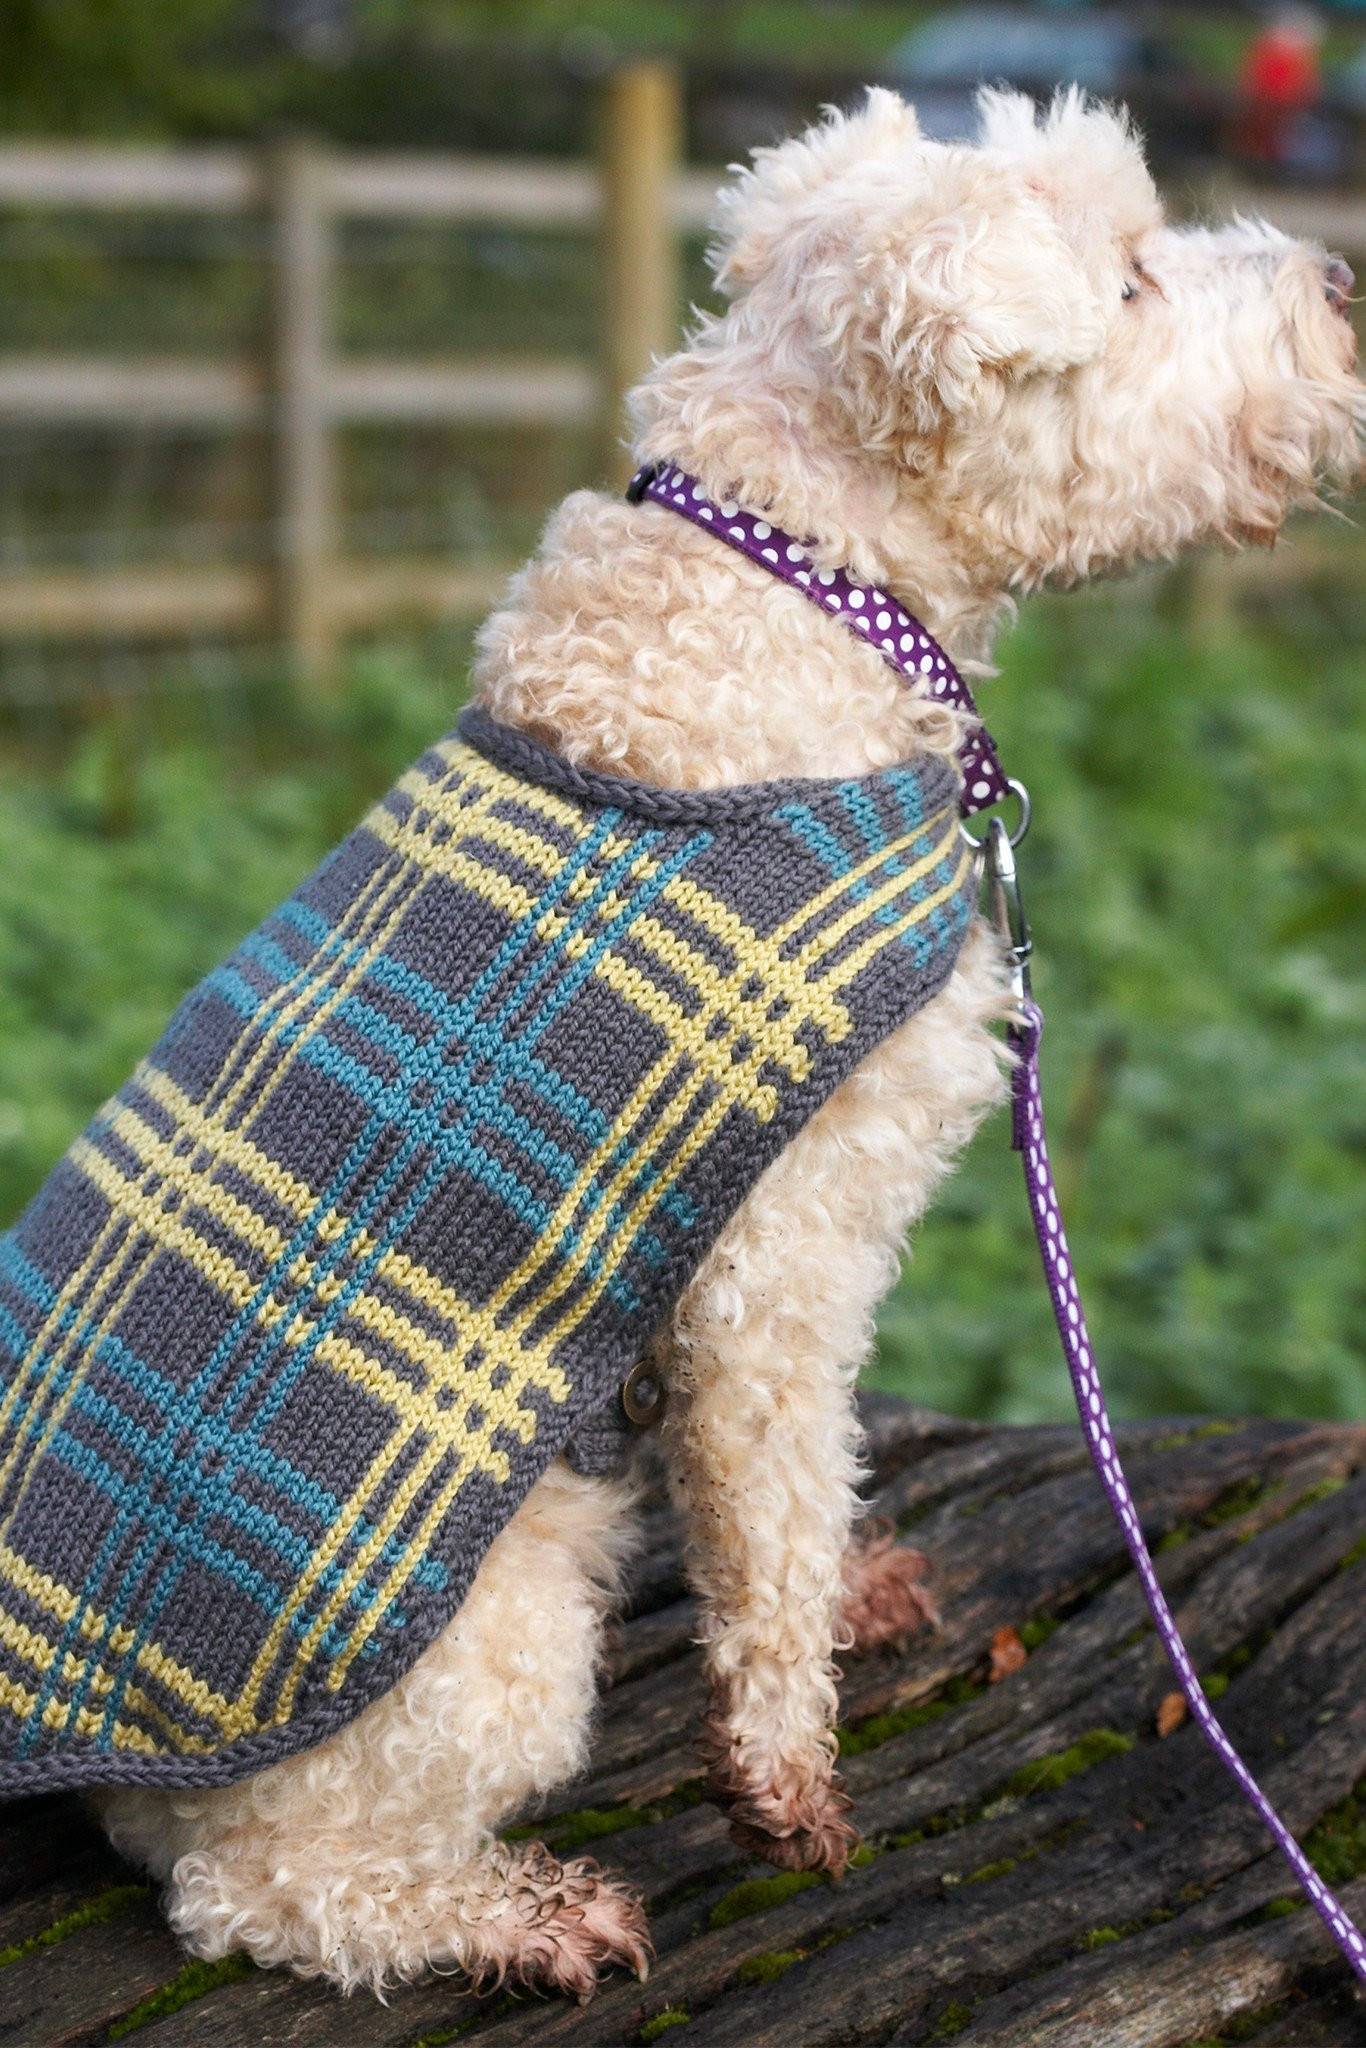 Vintage Dog Coat With Plaid Design Knitting Pattern | The ...